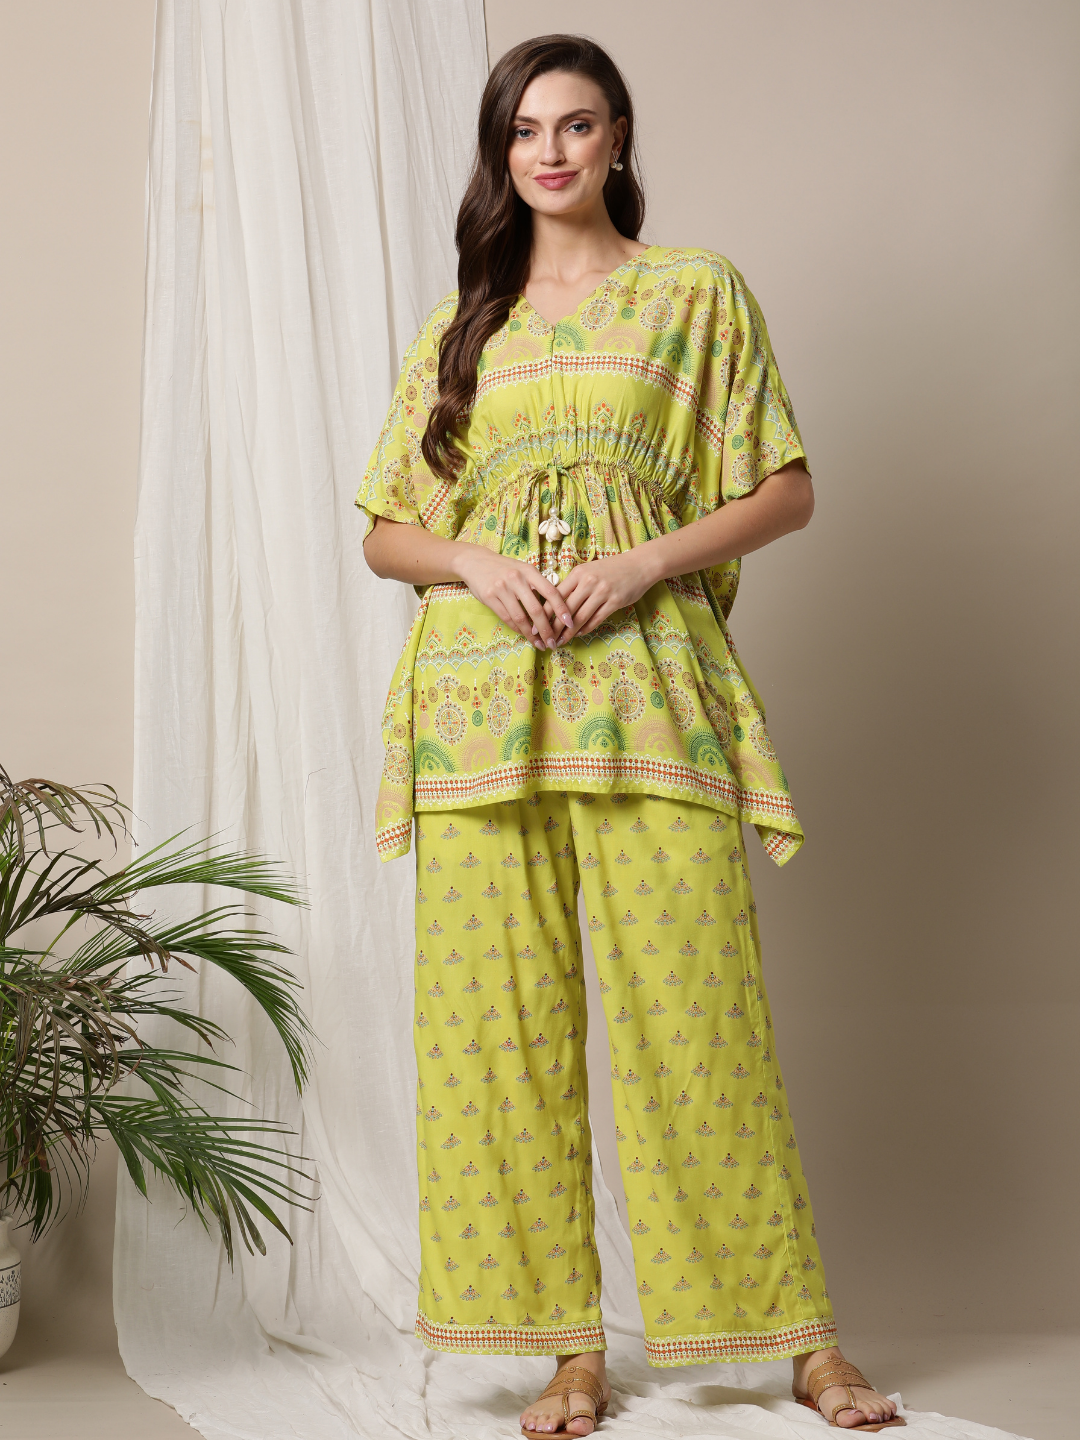 Women's Floral Printed Pure Cotton Kurti Palazzo Pants Set with Dupatt –  Amy's Cart Queen